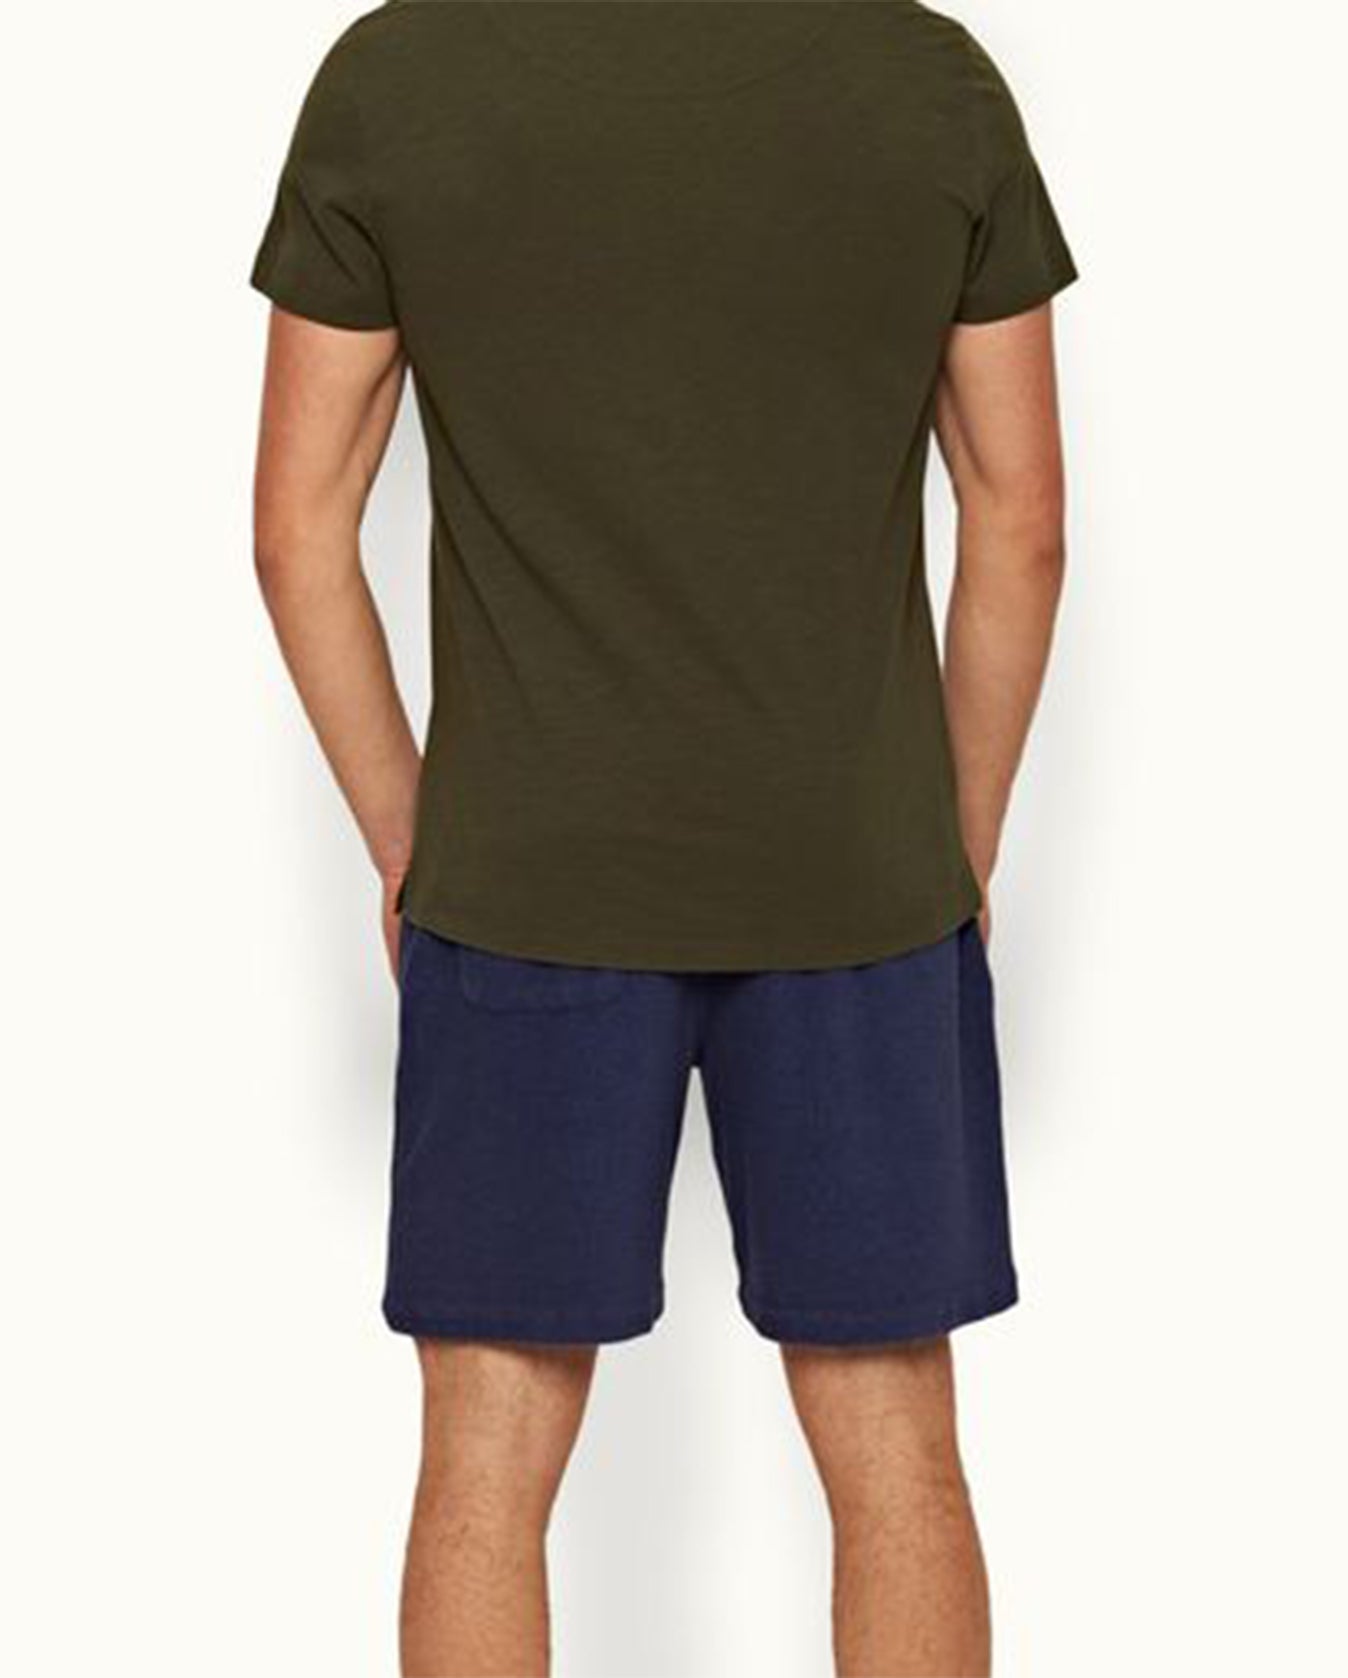 OB Classic Tee Gd - Palm – Fred Segal